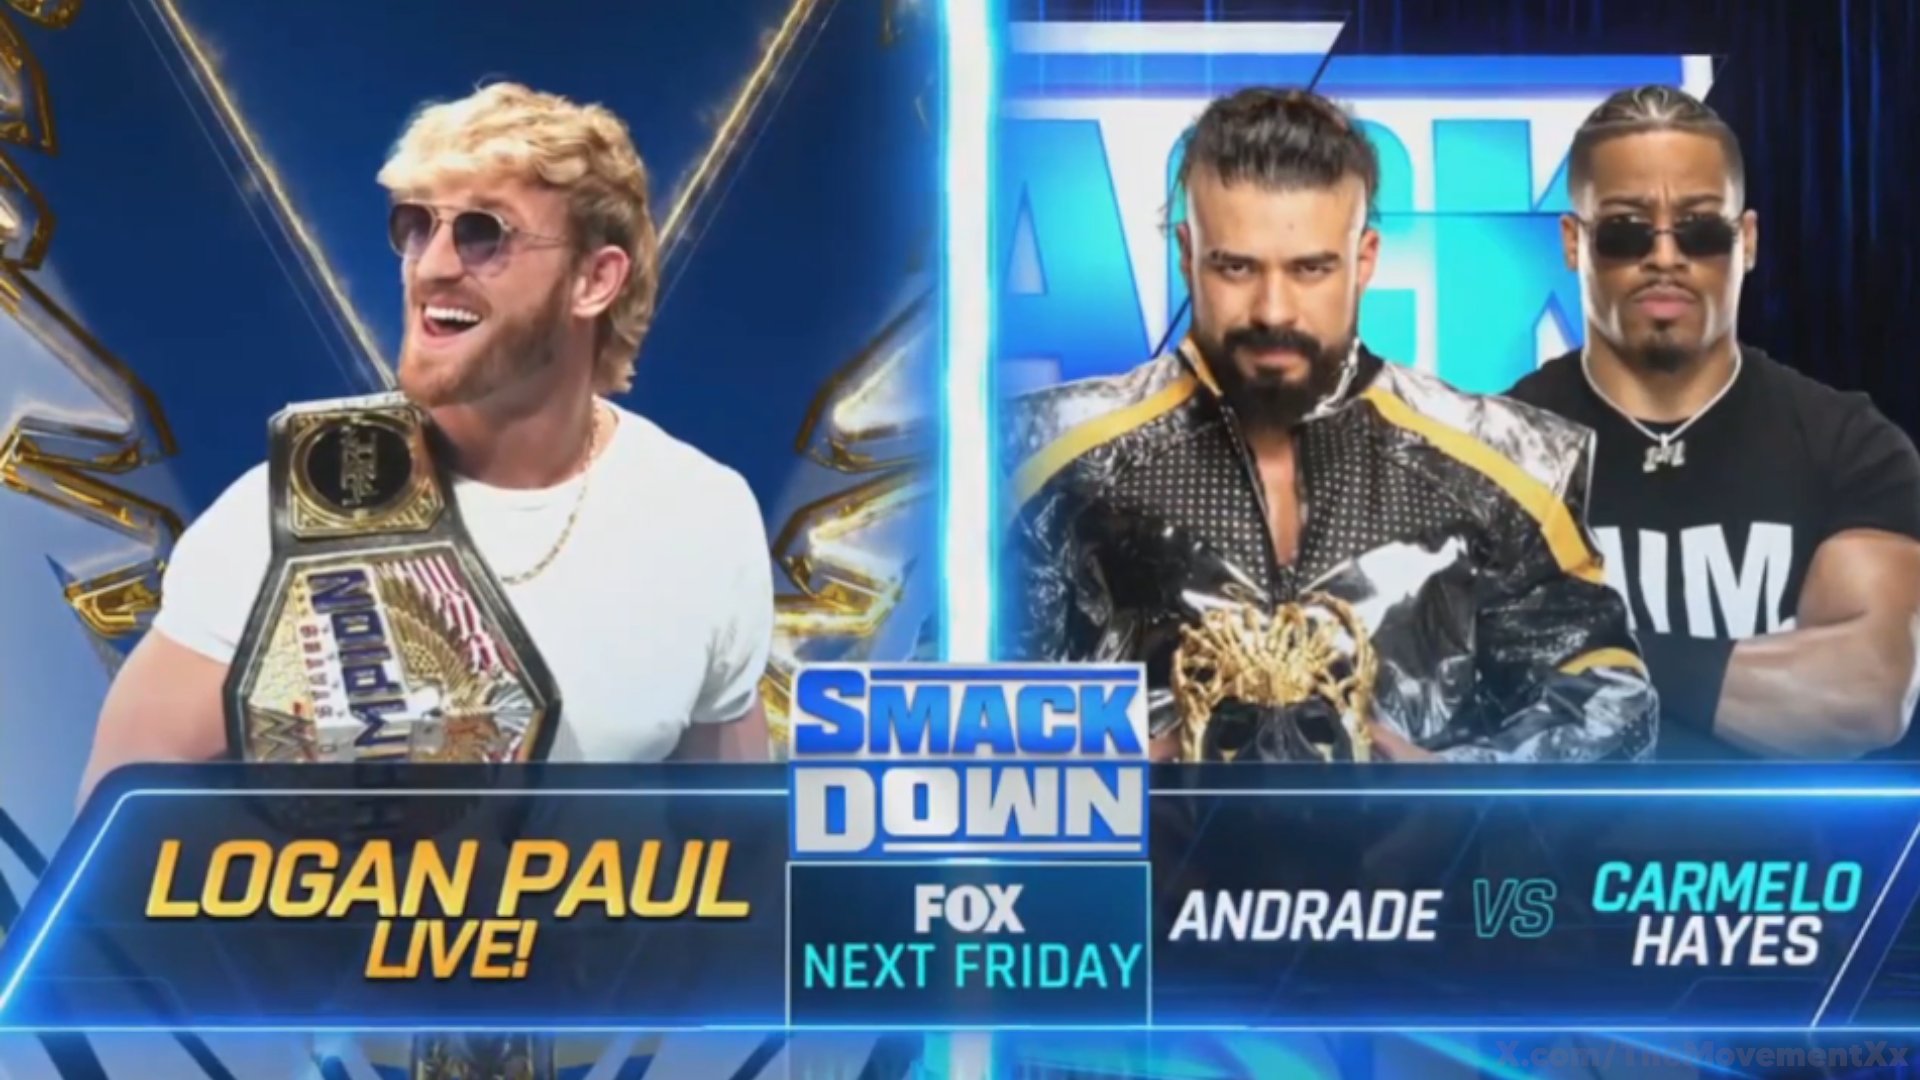 A WWE SmackDown graphic featuring Logan Paul, Andrade, and Carmelo Hayes.